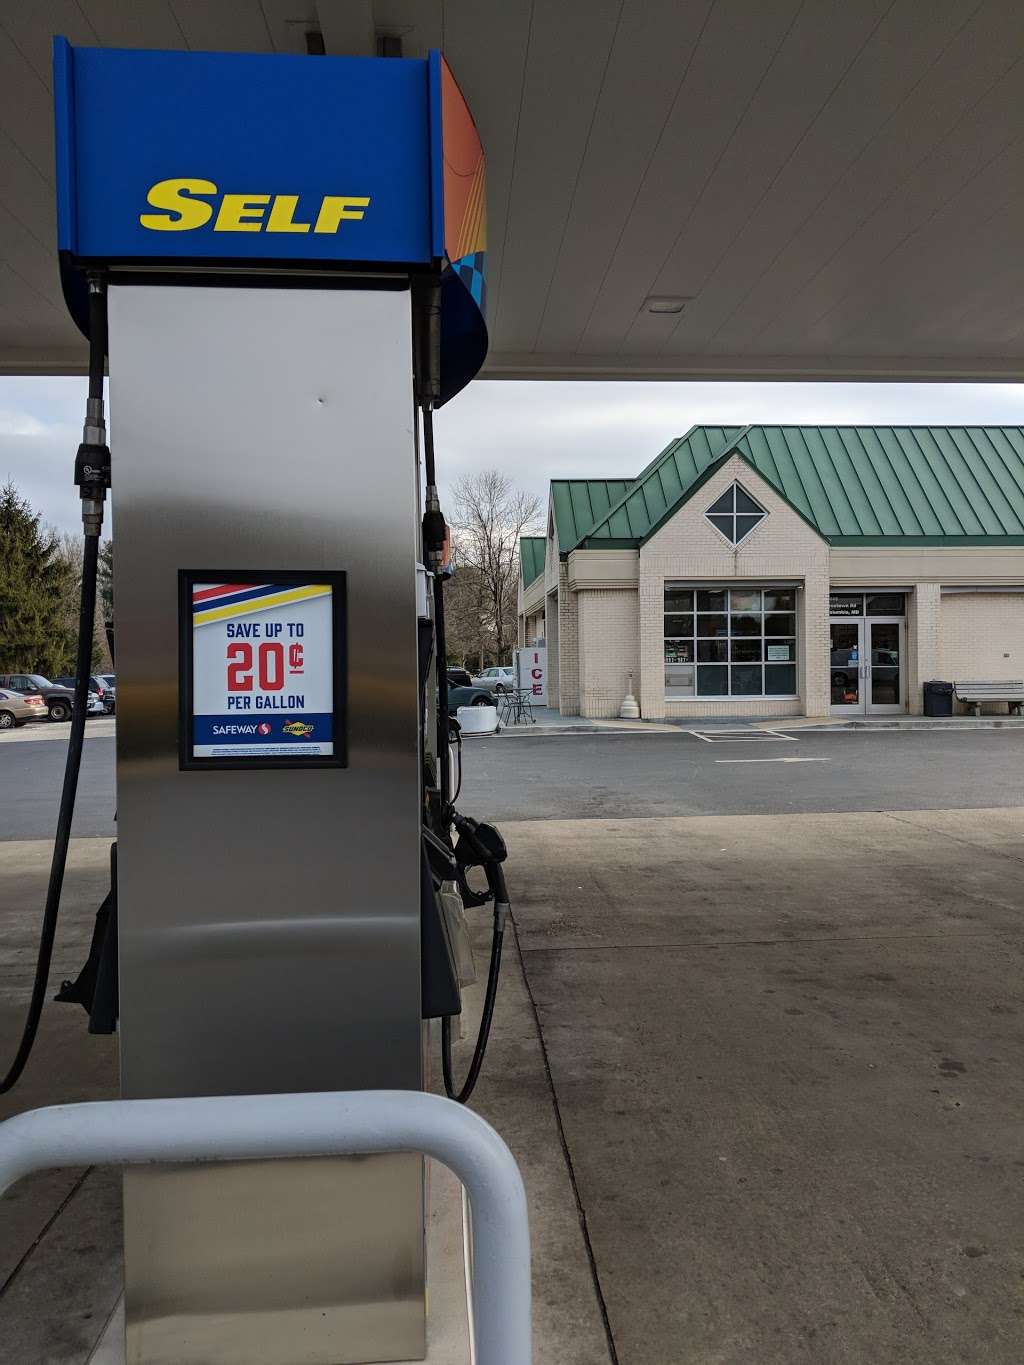 Sunoco Gas Station | 6440 Freetown Rd, Columbia, MD 21044 | Phone: (410) 531-9077